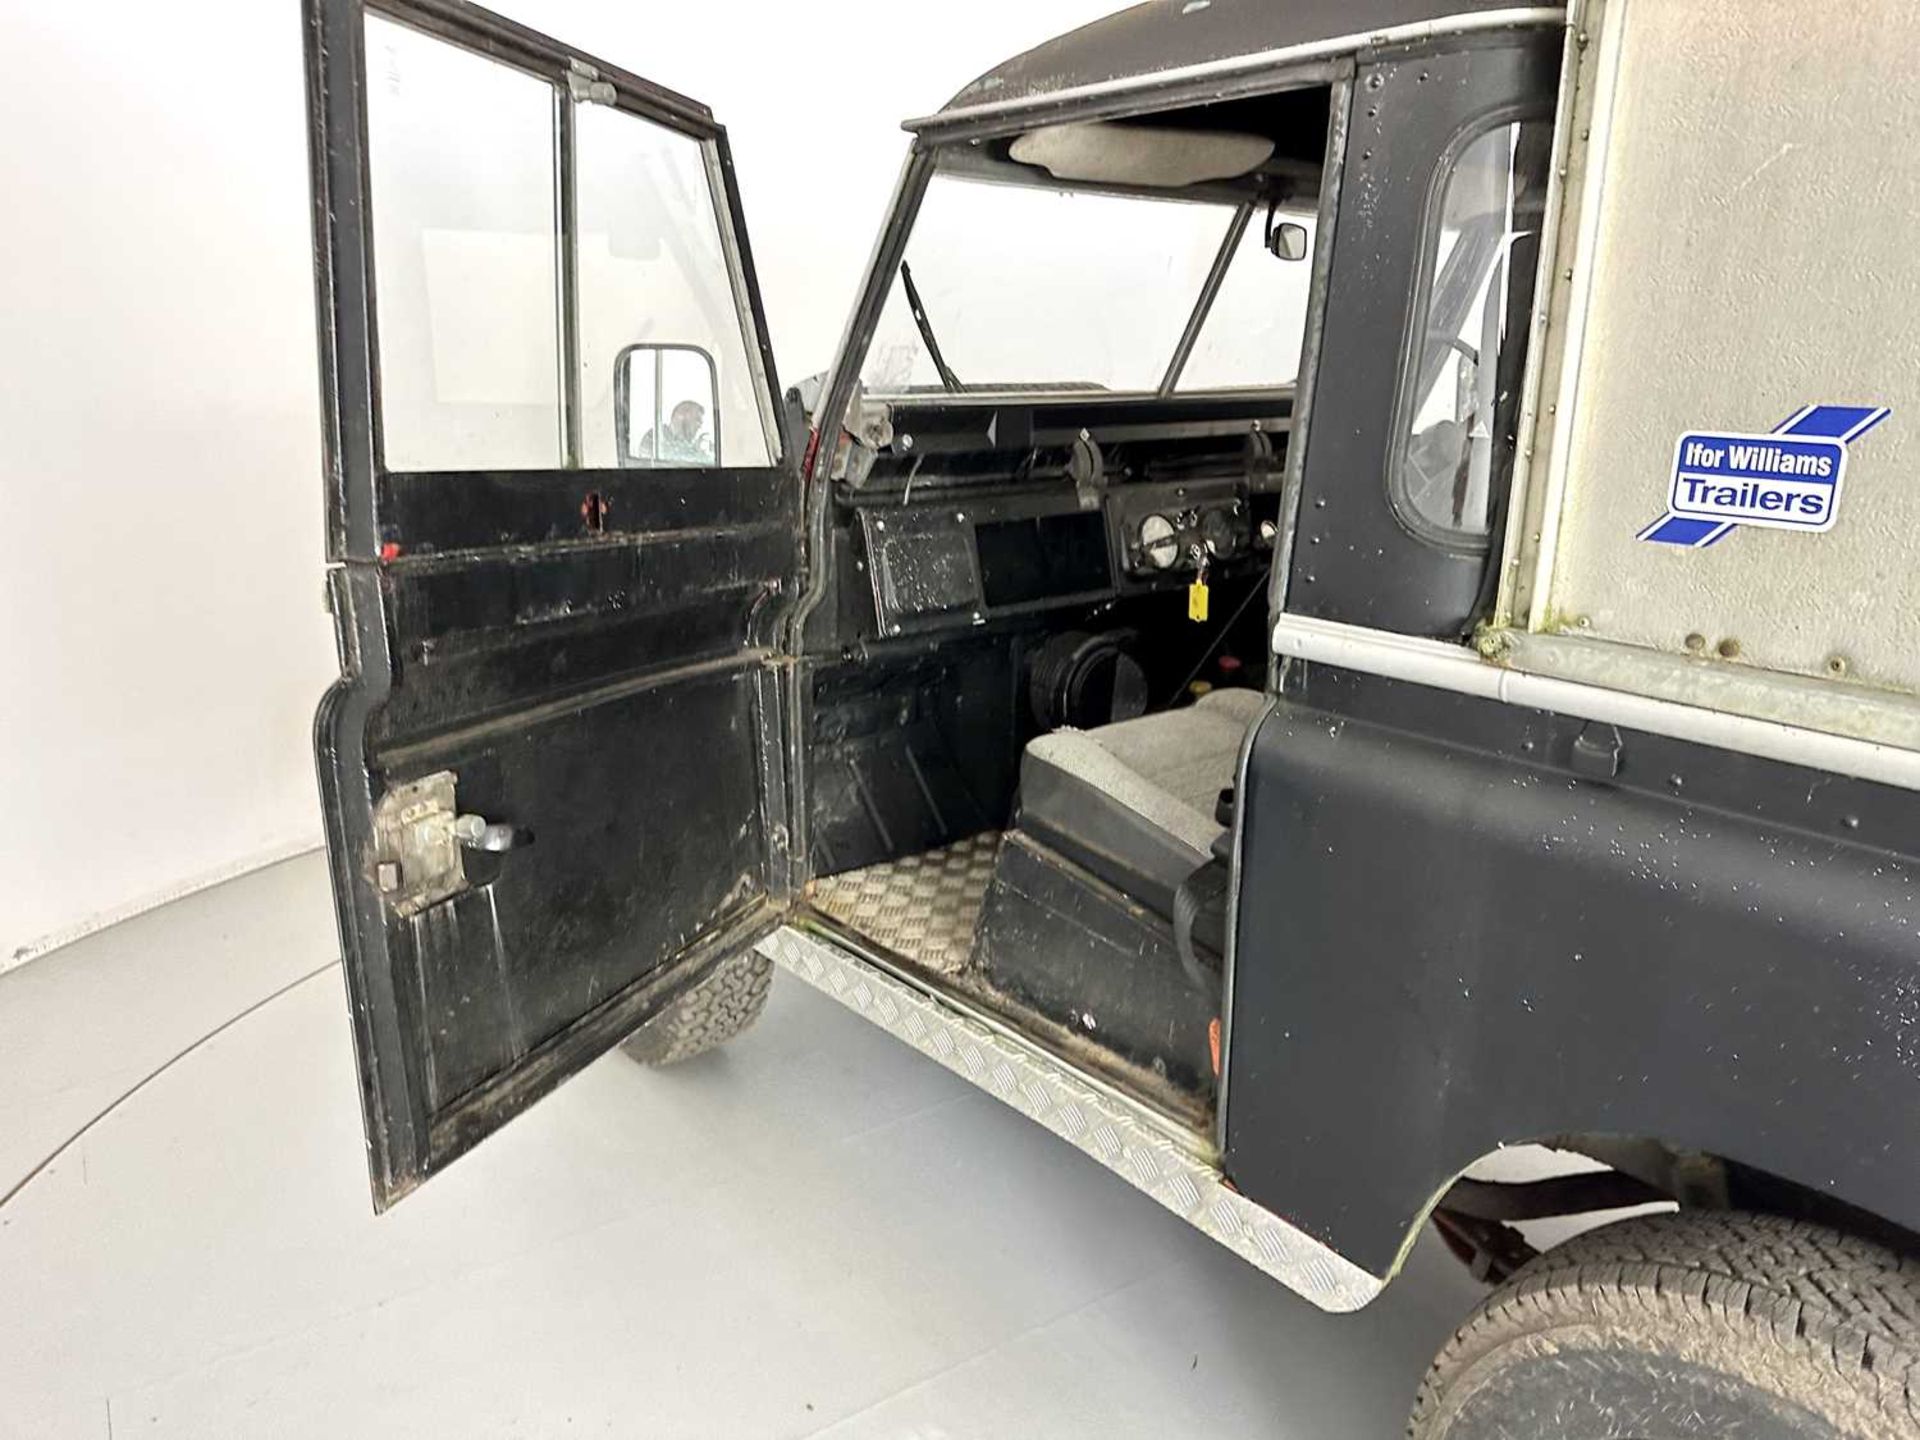 1969 Land Rover Series 2A - Image 20 of 27